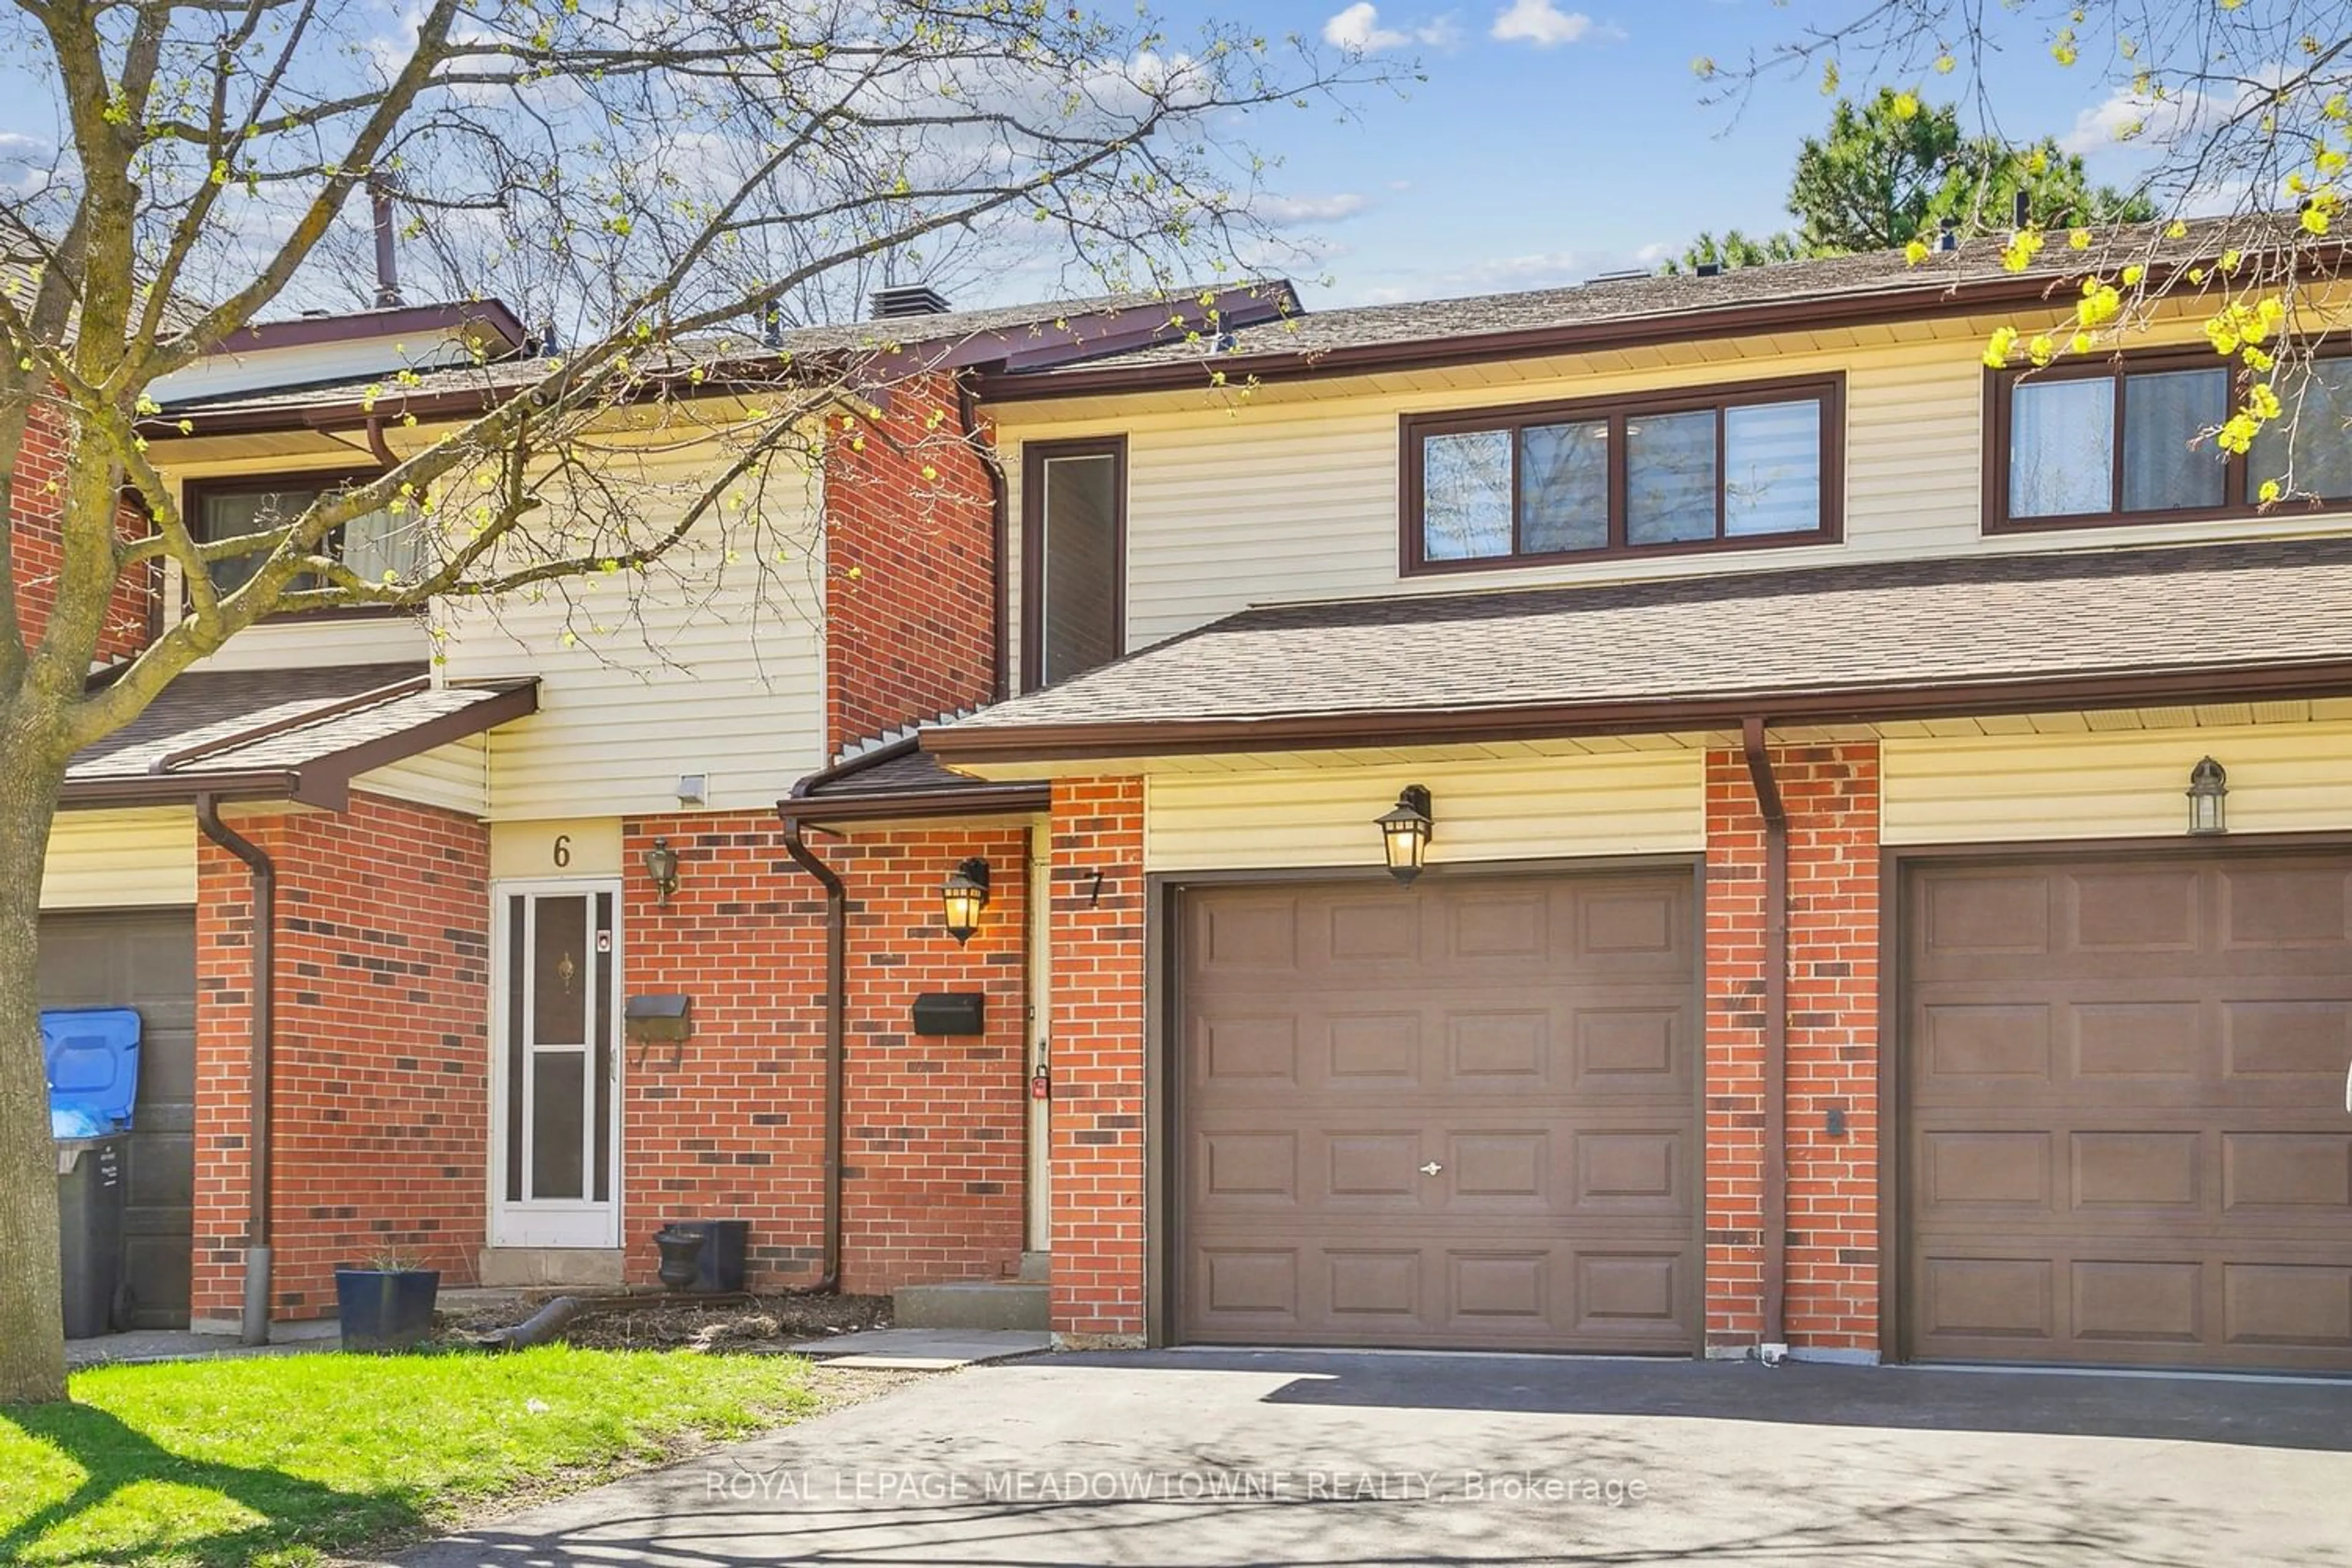 Home with brick exterior material for 7 Collins Cres, Brampton Ontario L6V 3M9